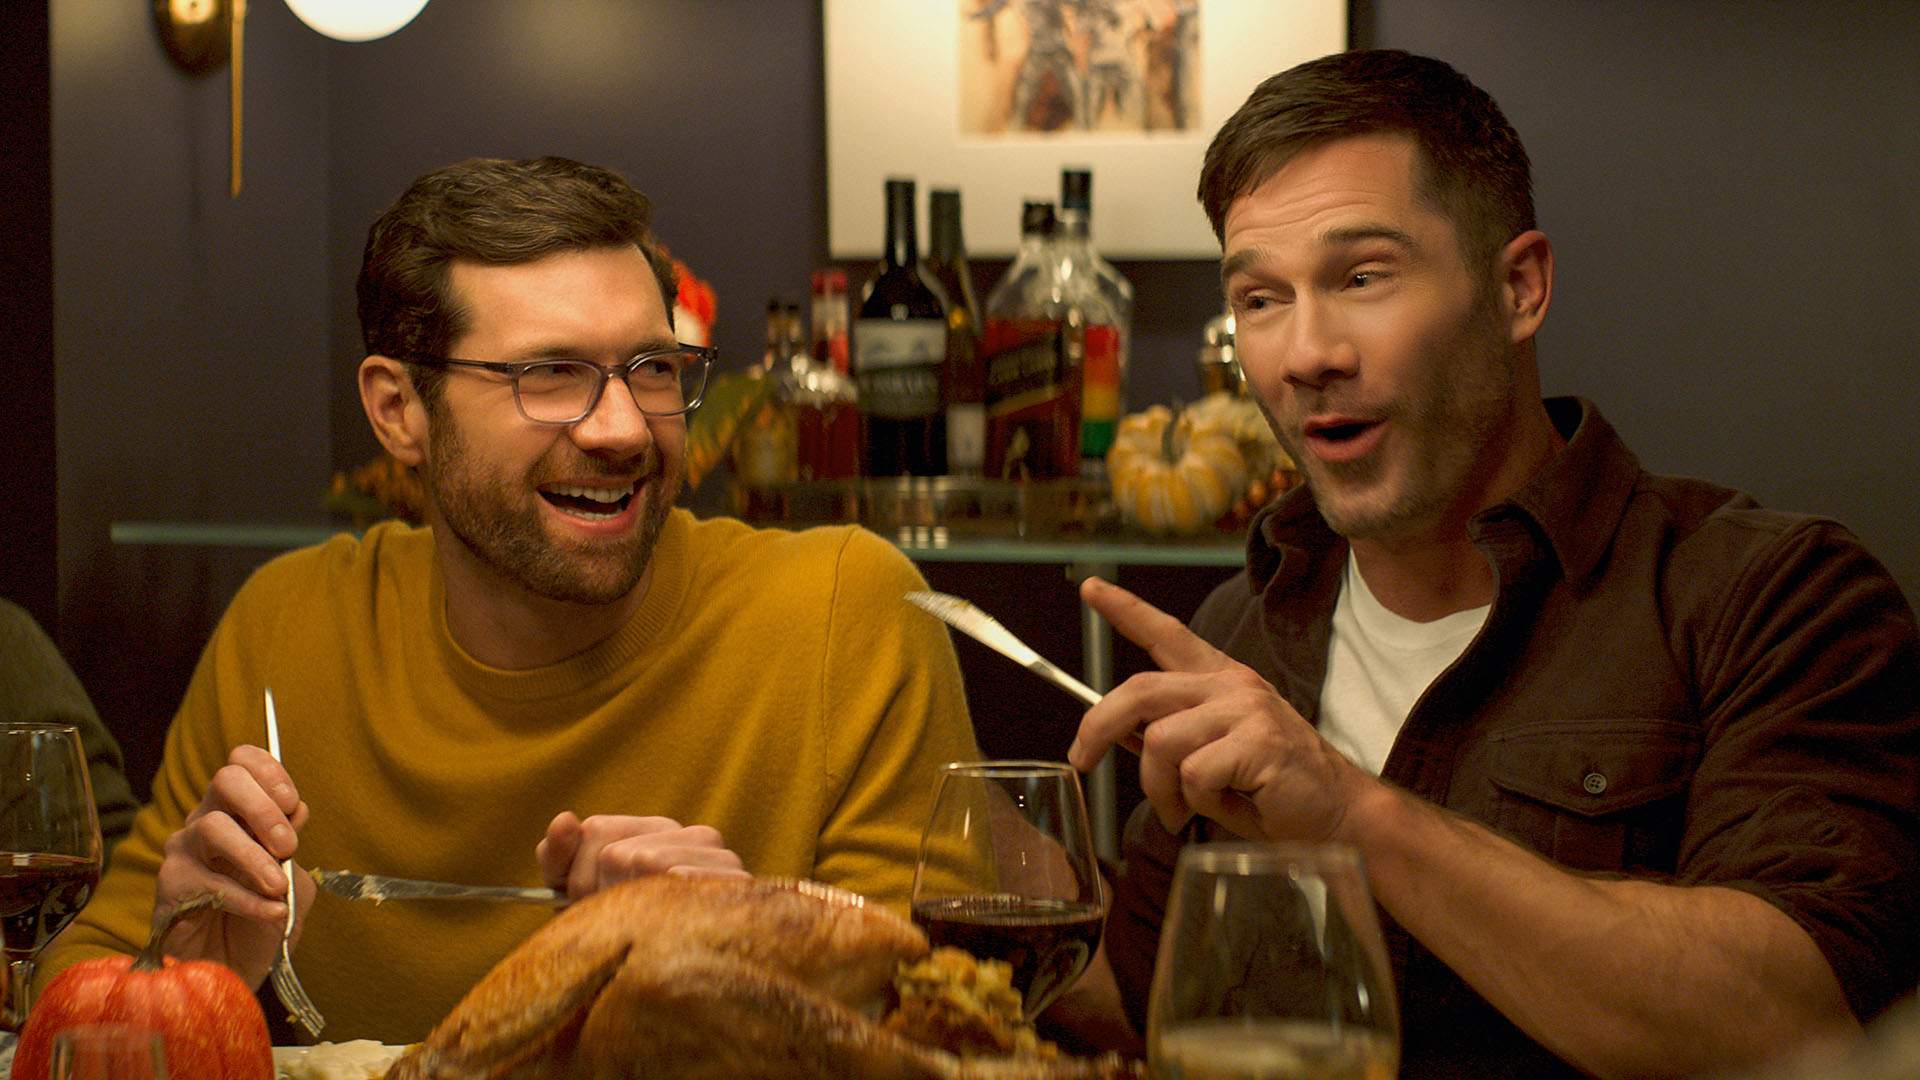 The First Trailer for Billy Eichner's 'Bros' Is Here to Make Your Queer Rom-Com Dreams Come True